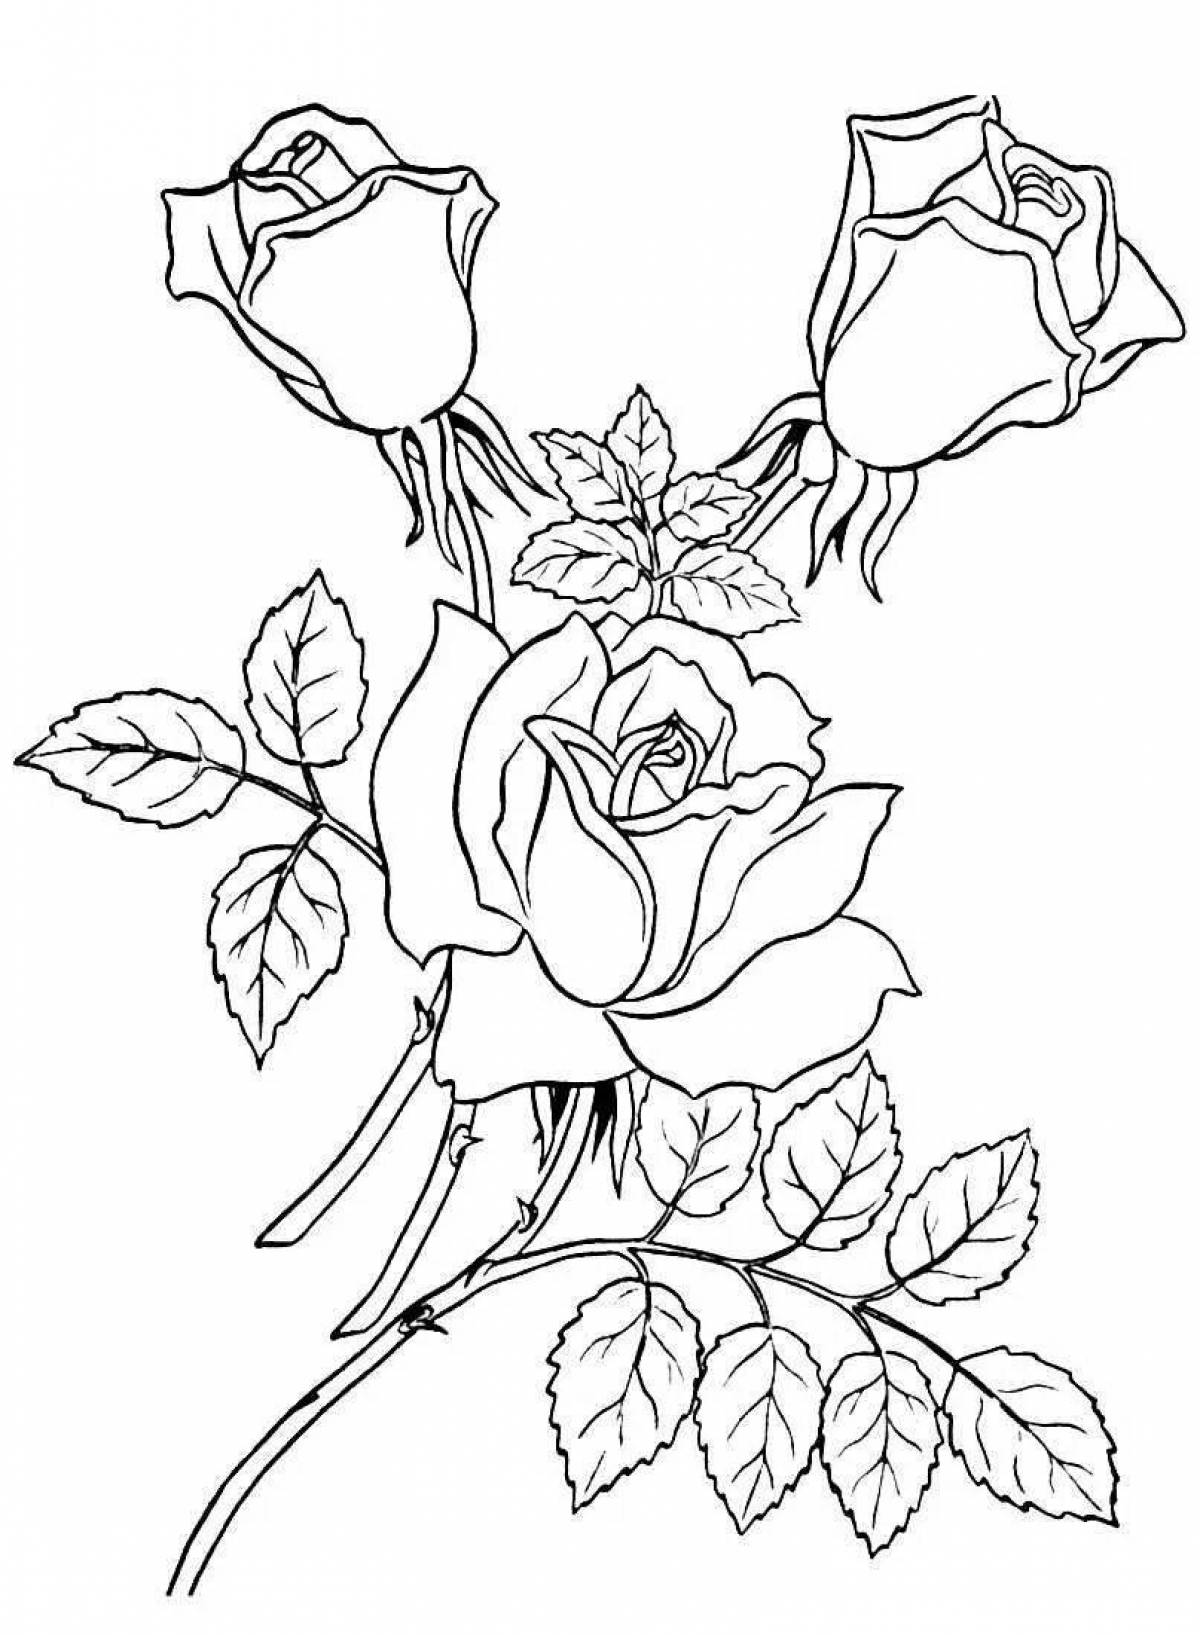 Coloring majestic rose for girls